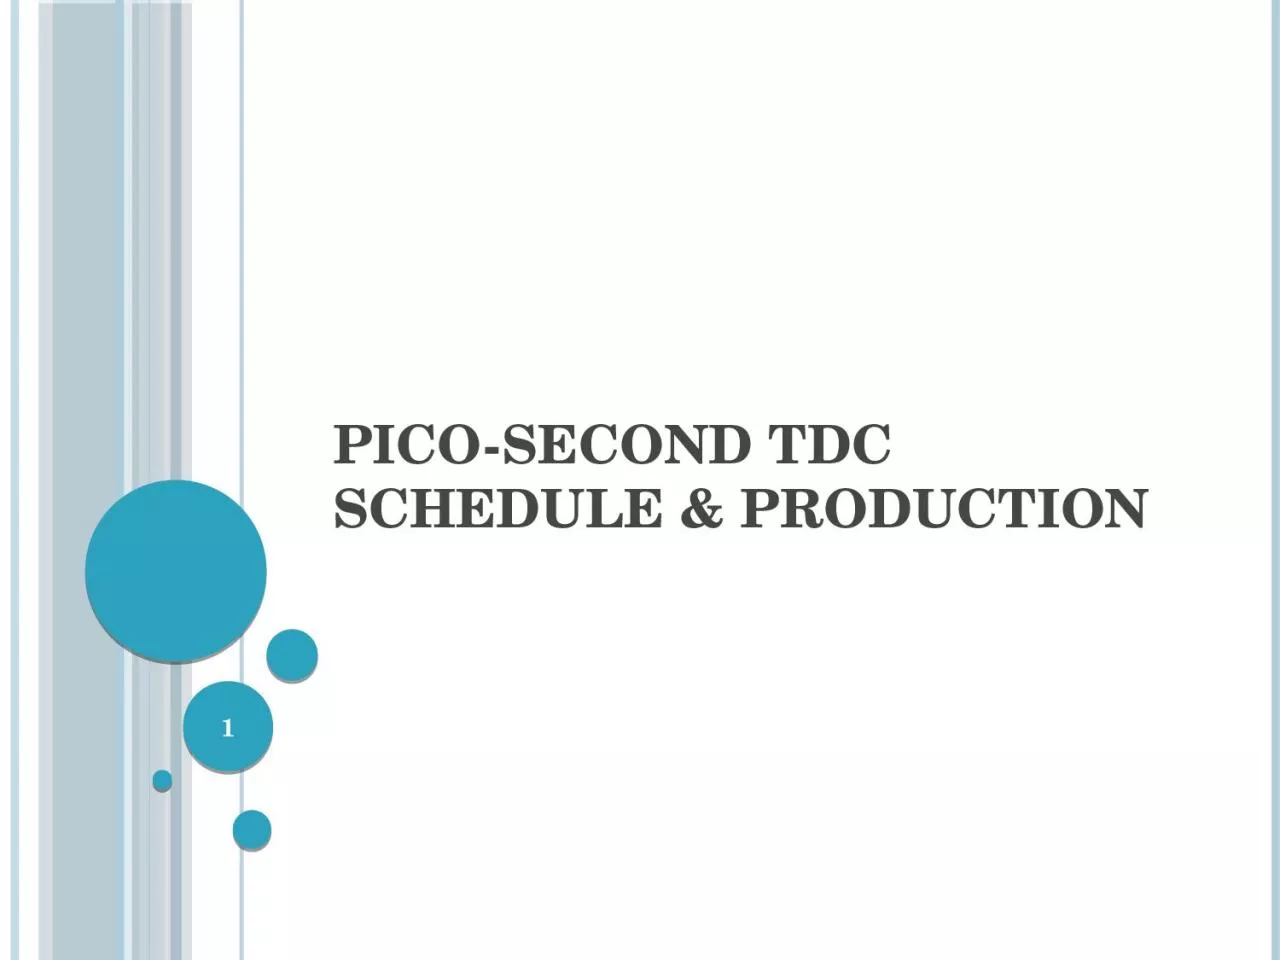 Pico-second TDC Schedule & Production